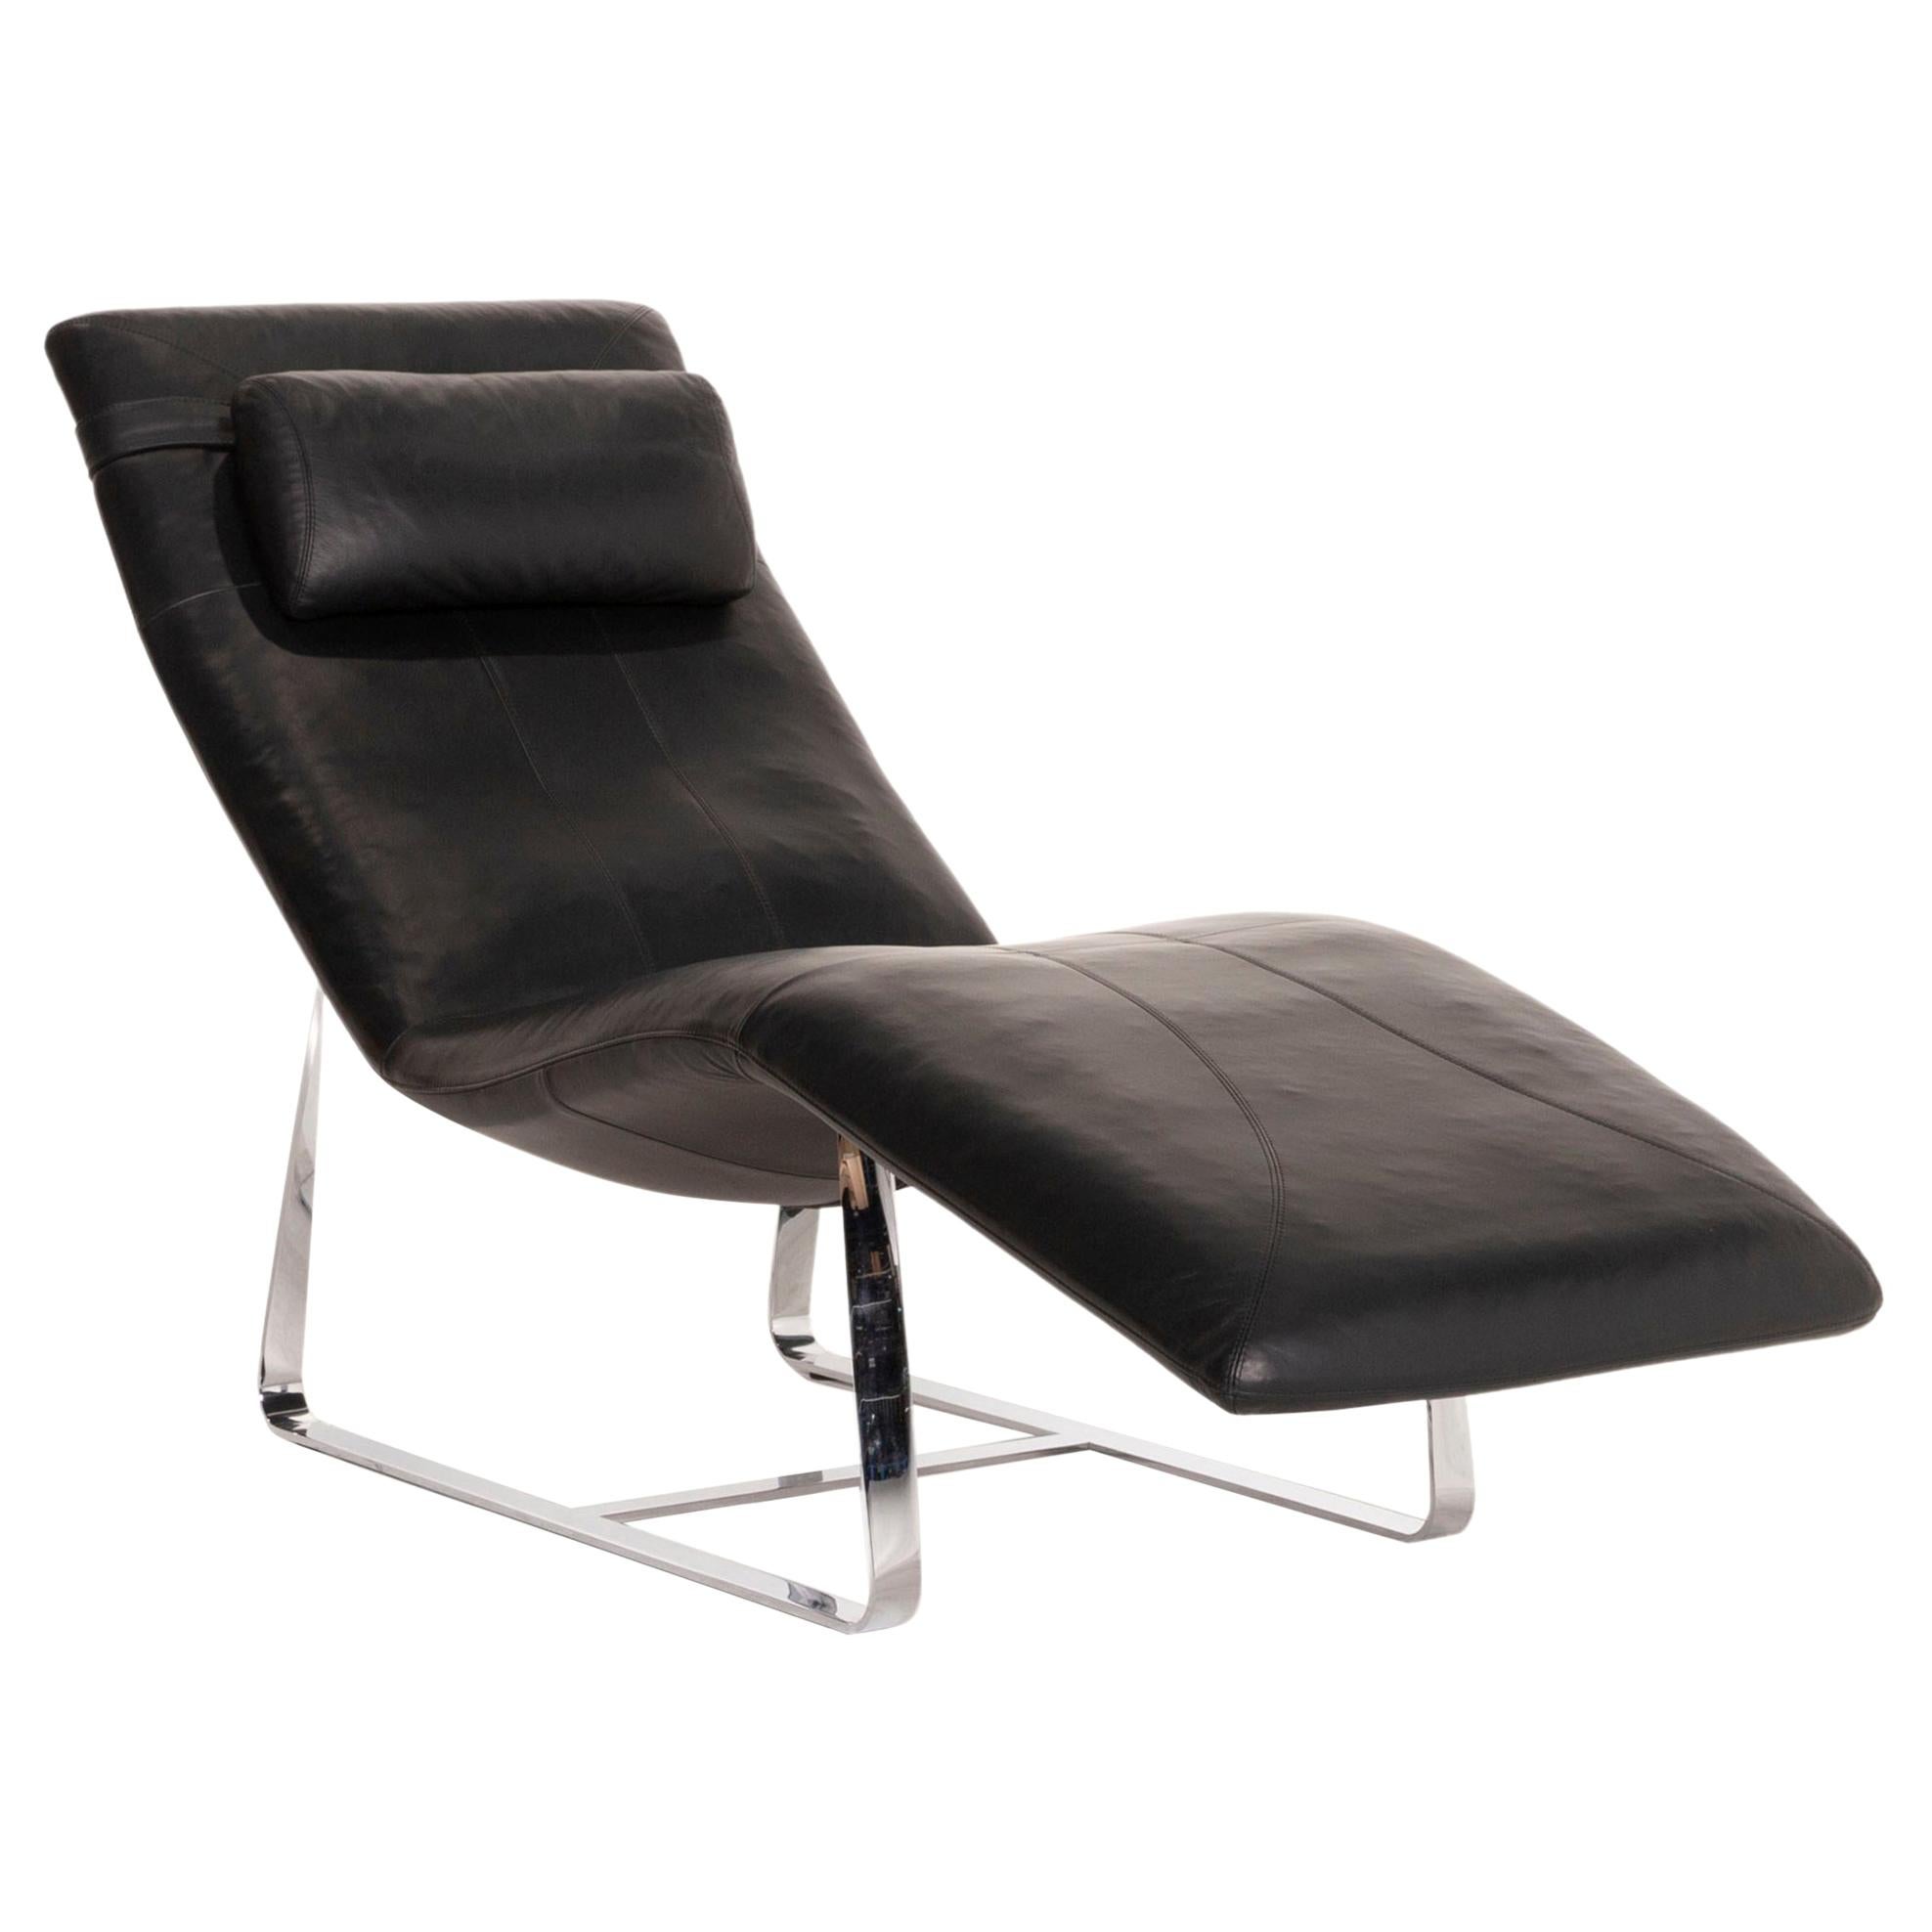 Rolf Benz LC 360 Leather Lounger Black